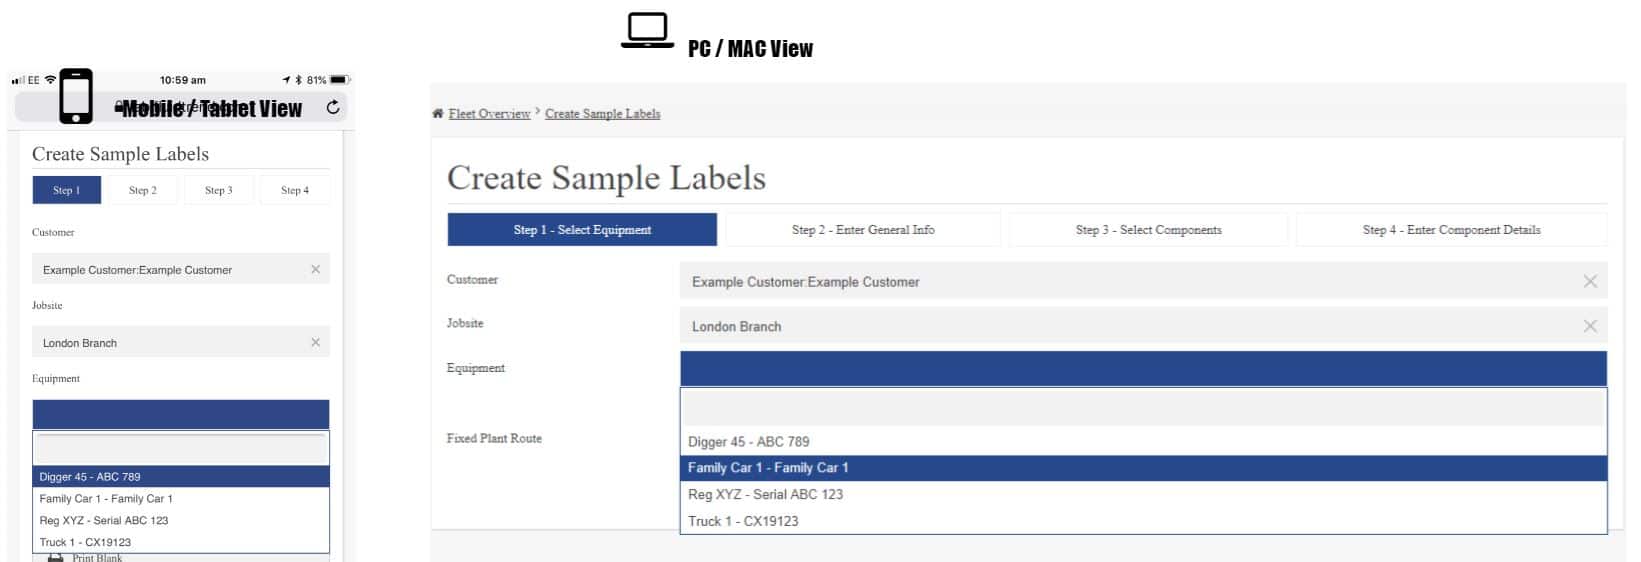 step 1 pre reg Pre register samples for already created machines/assets (create sample labels step 2 of 2)